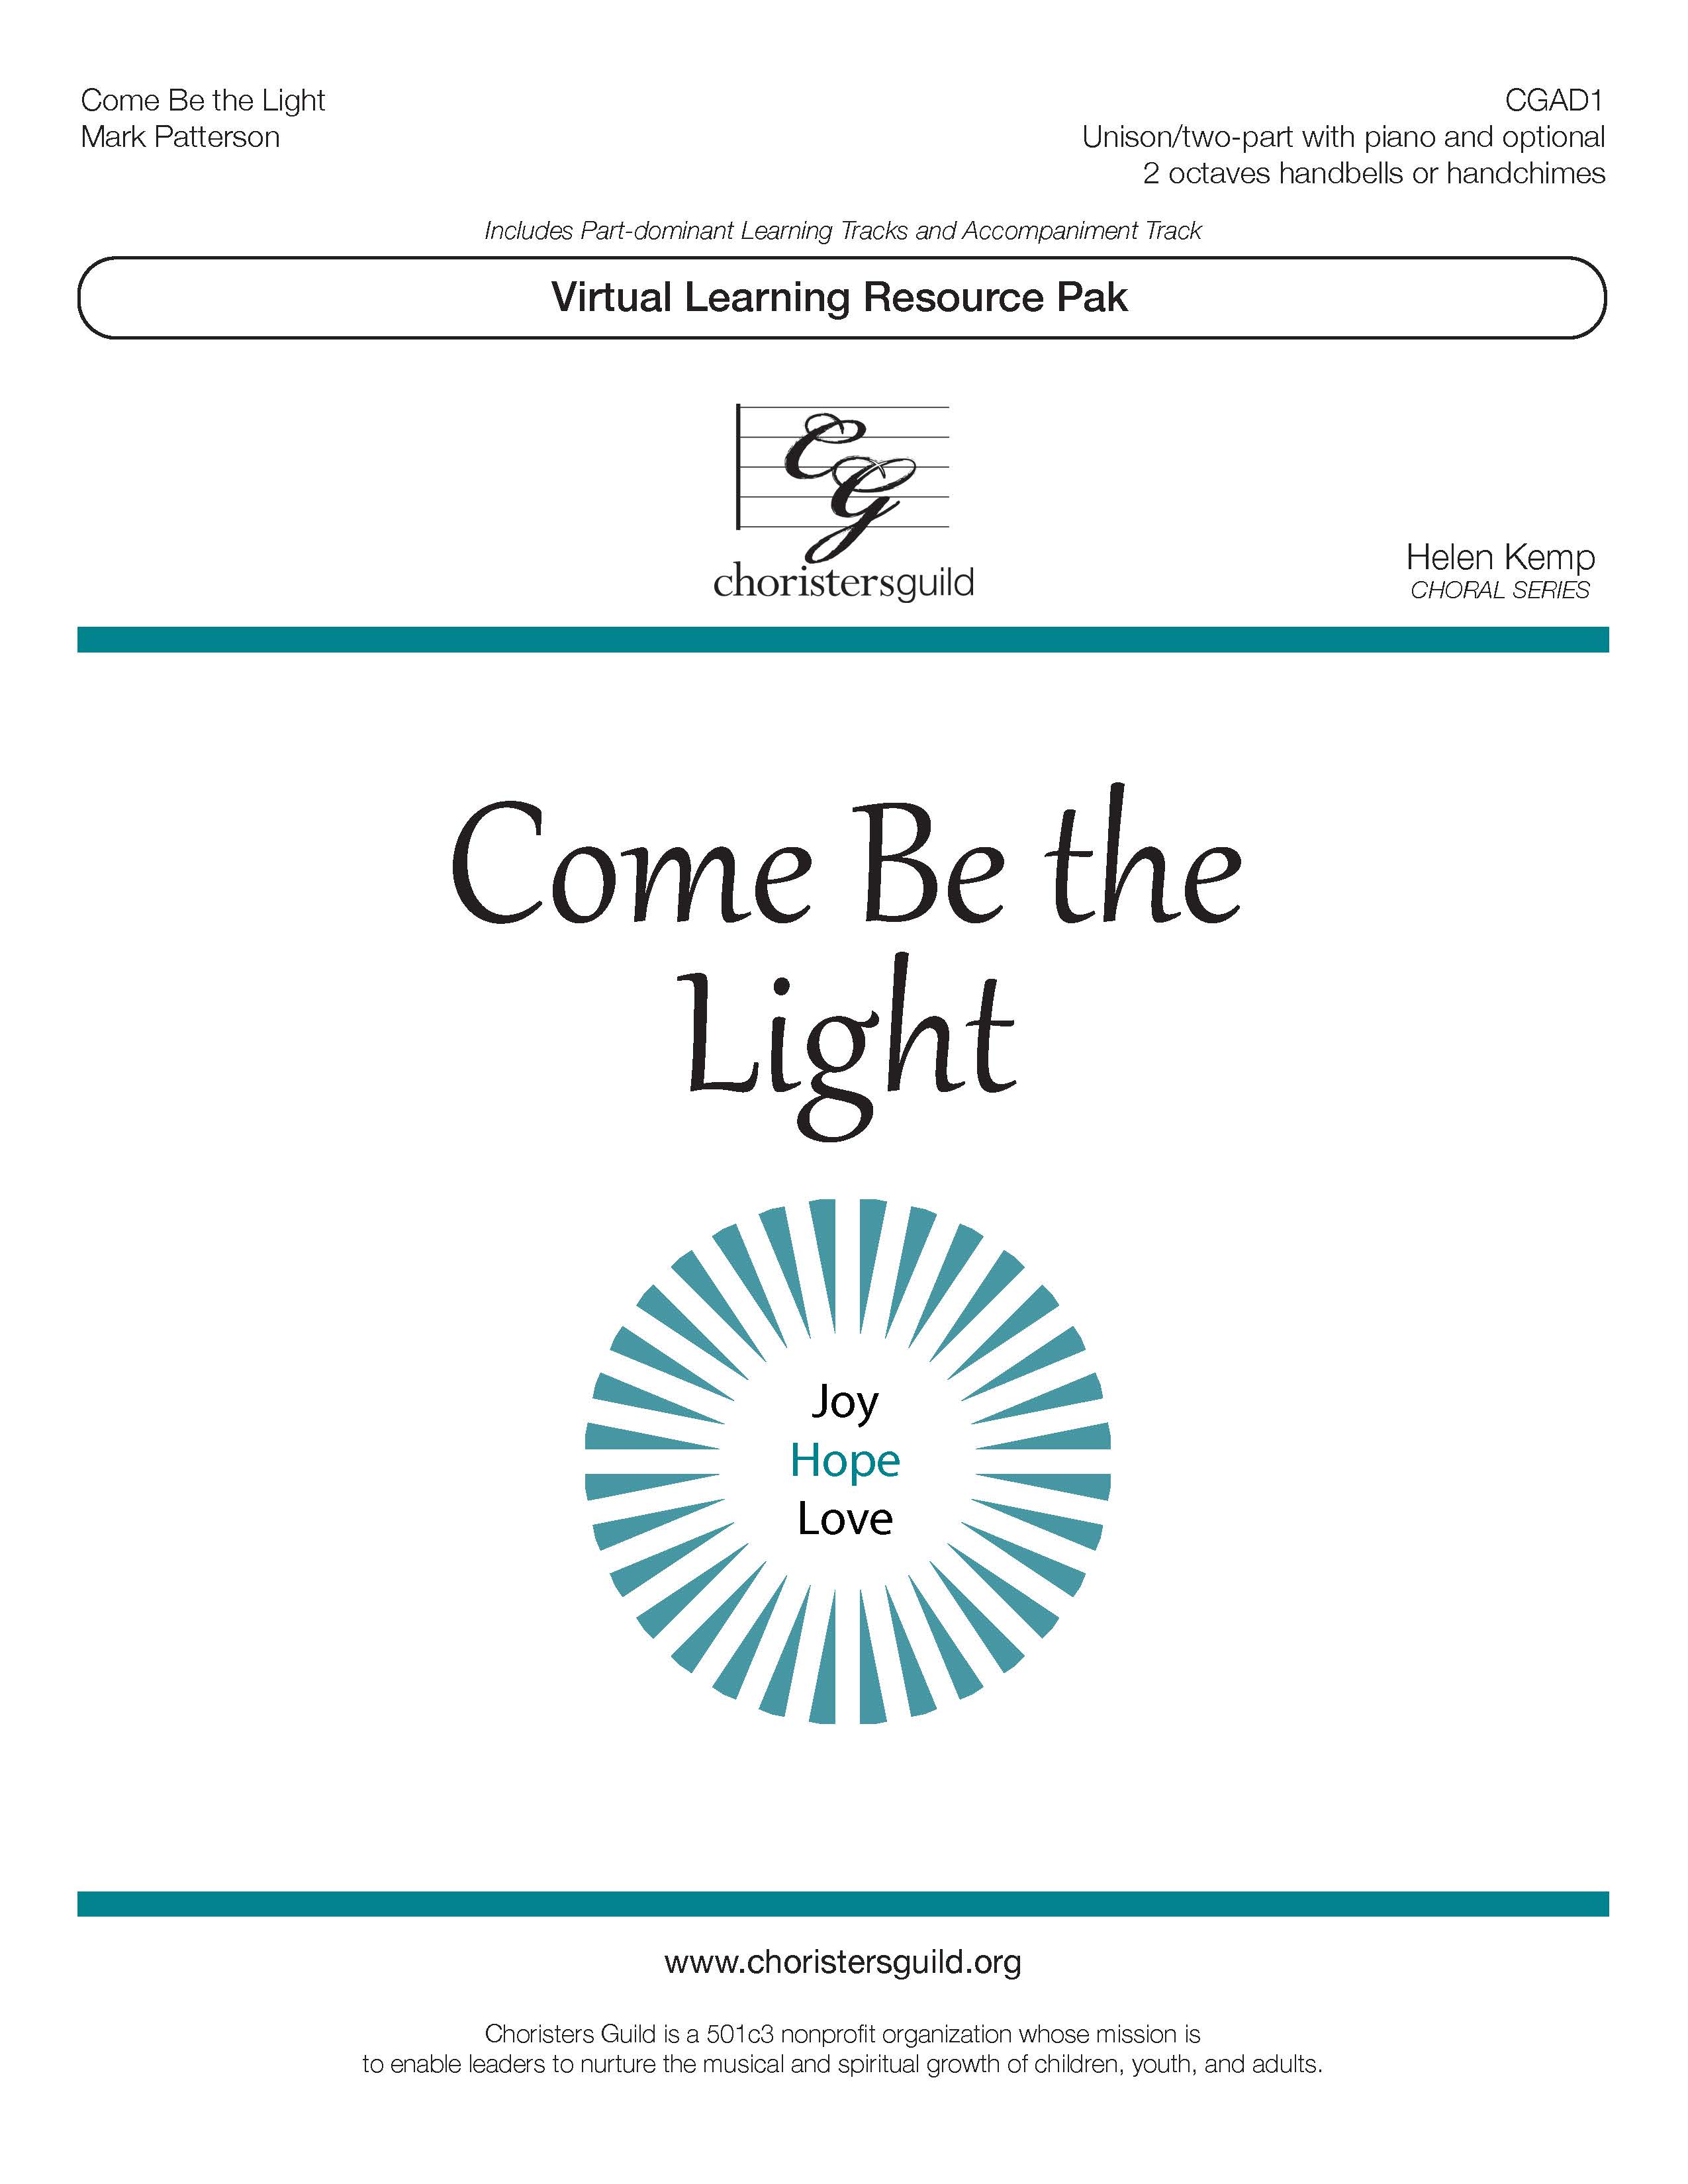 Come Be the Light (Virtual Learning Resource Pak) - Unison/Two-part